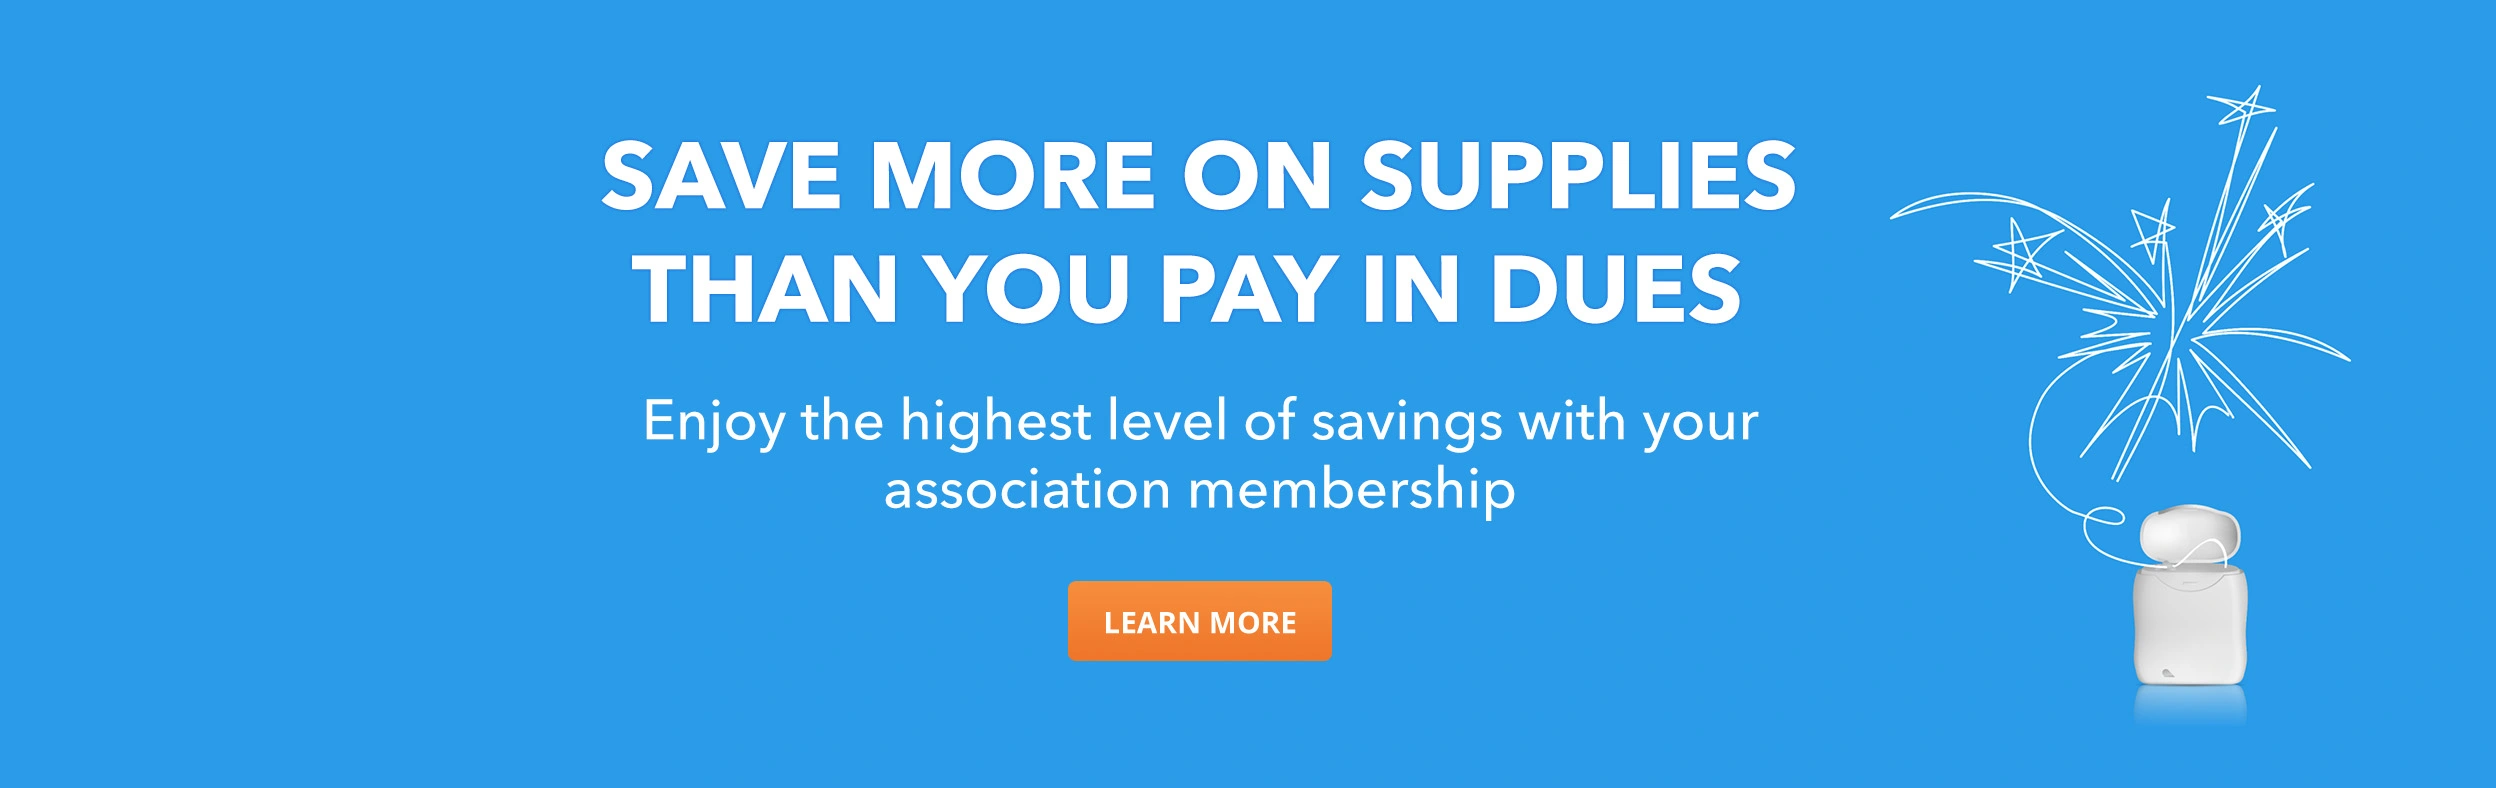 Save More on Supplies Than You Pay In Dues. Enjoy the highest level of savings with your association membership.